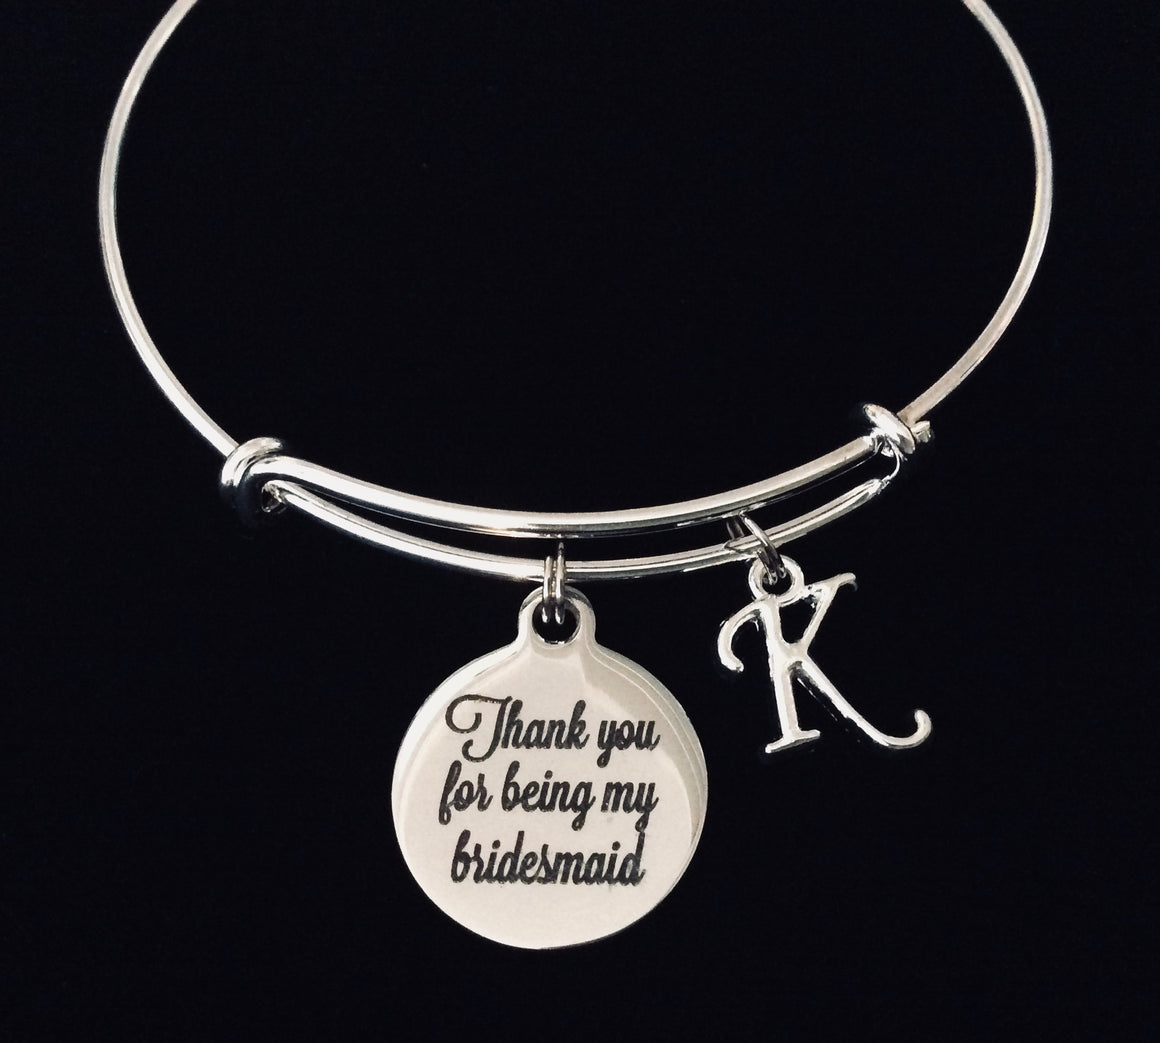 Thank You For Being My Bridesmaid Adjustable Bracelet Expandable Silver Wire Bangle Wedding Shower Bridal Trendy Proposal One Size Fits All Gift